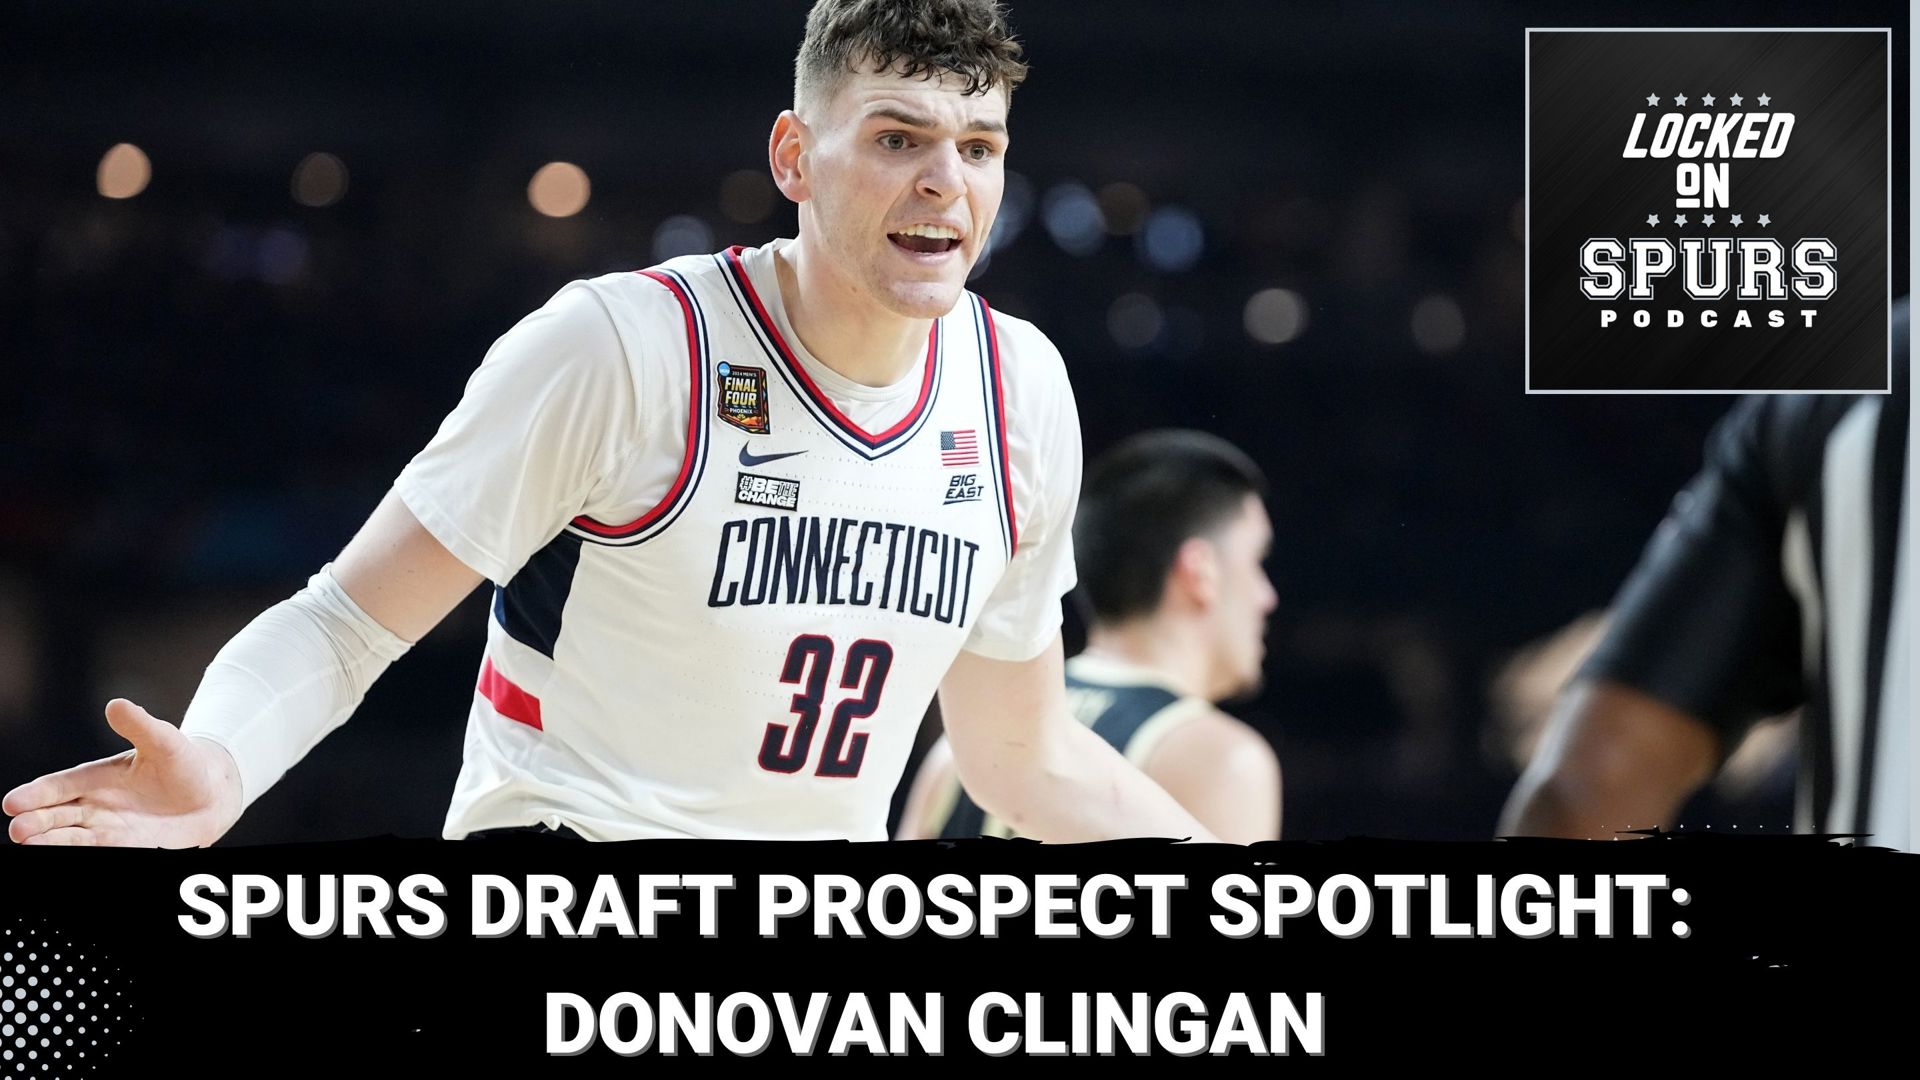 Should the Spurs use one of their picks to select the UConn big man?